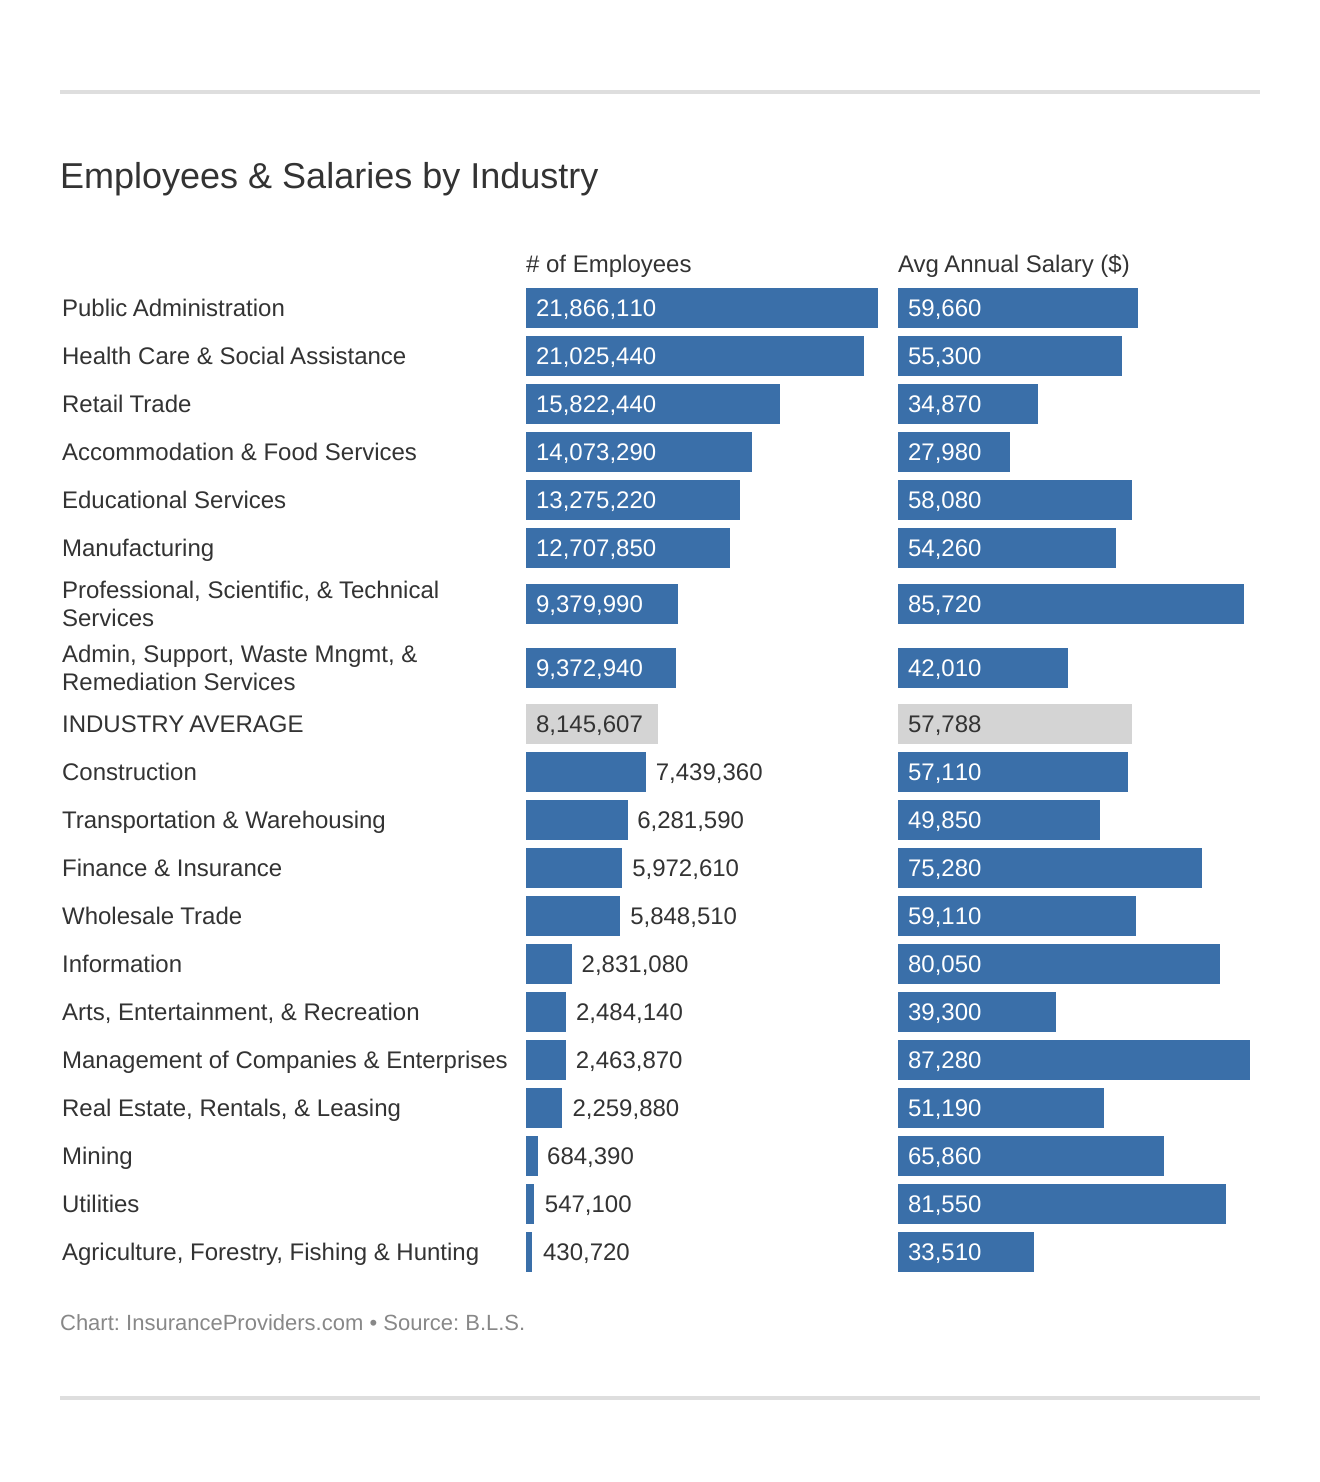 Employees & Salaries by Industry